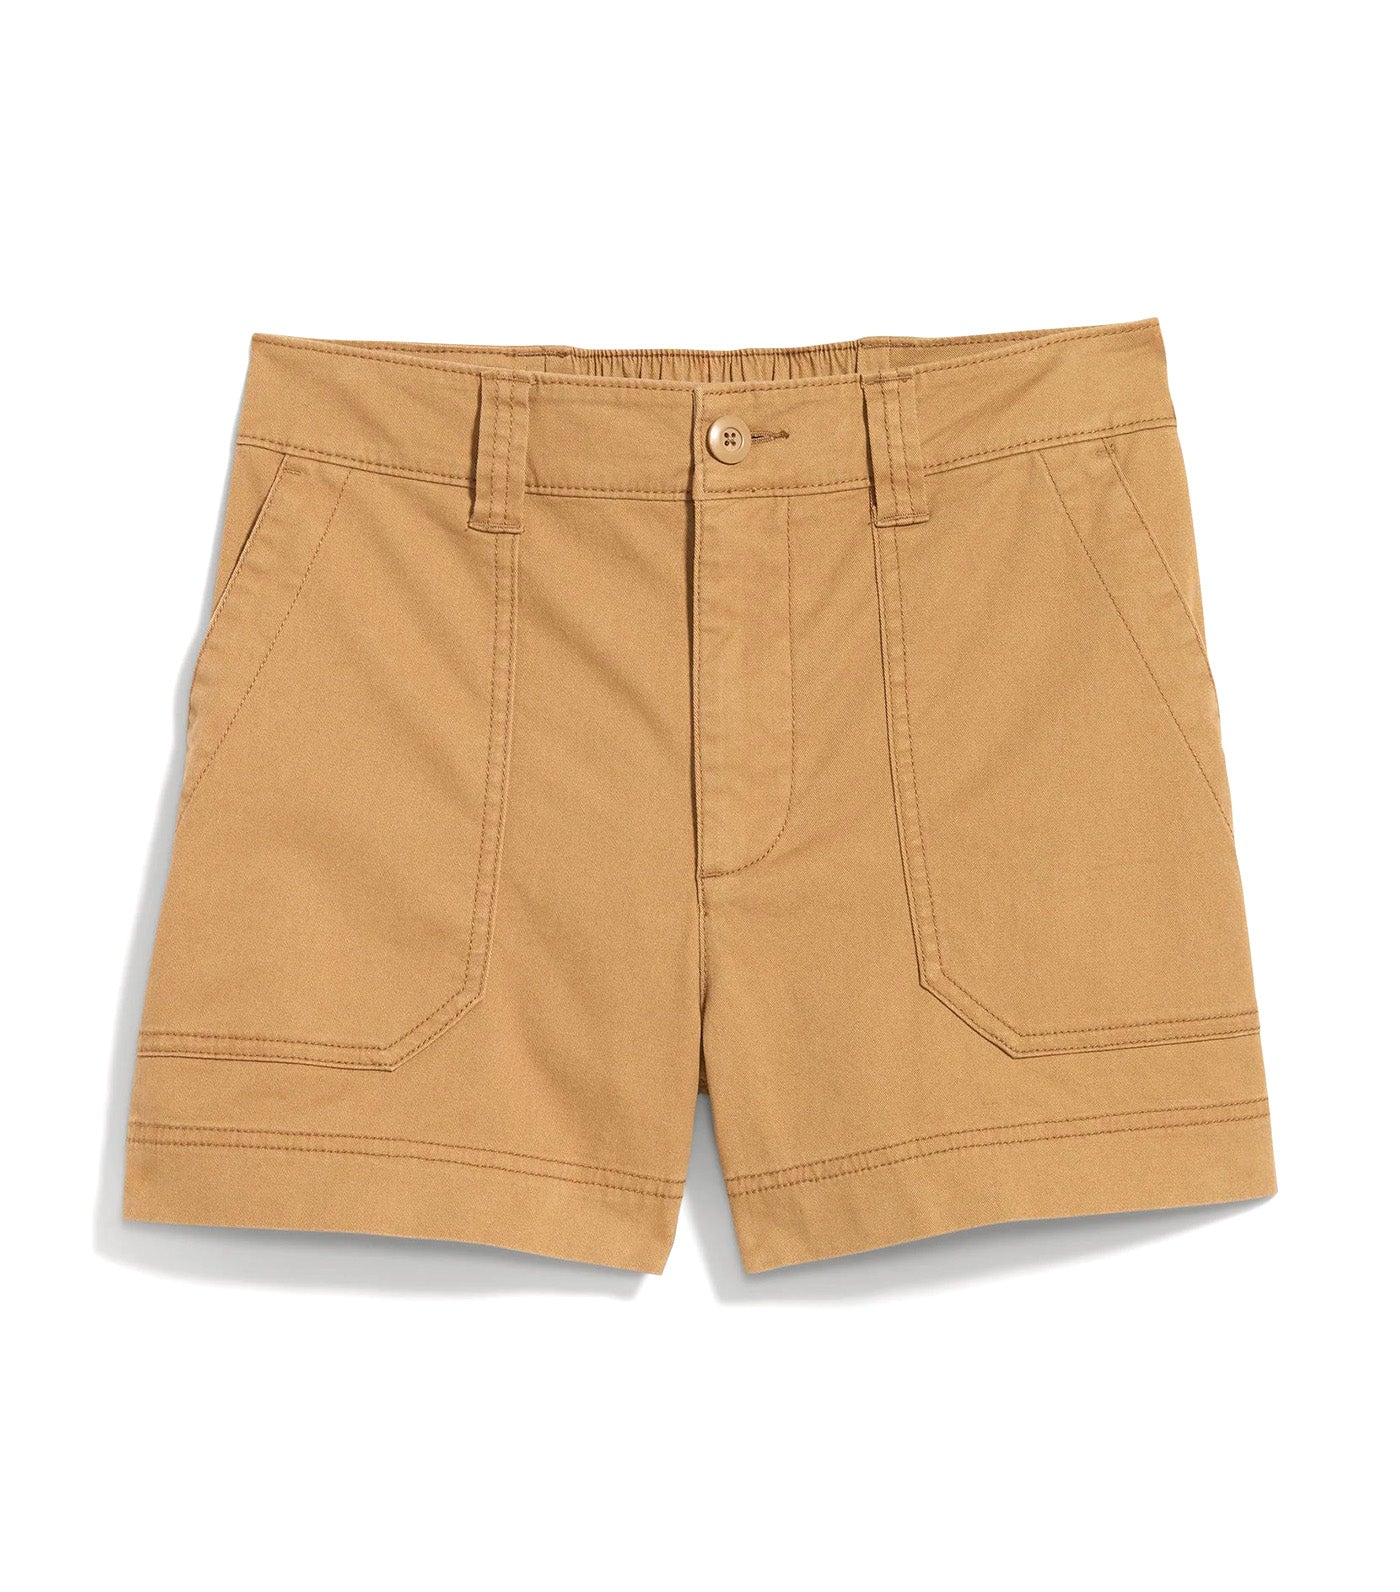 High-Waisted OGC Utility Chino Shorts for Women 3.5-Inch Inseam Clifftop